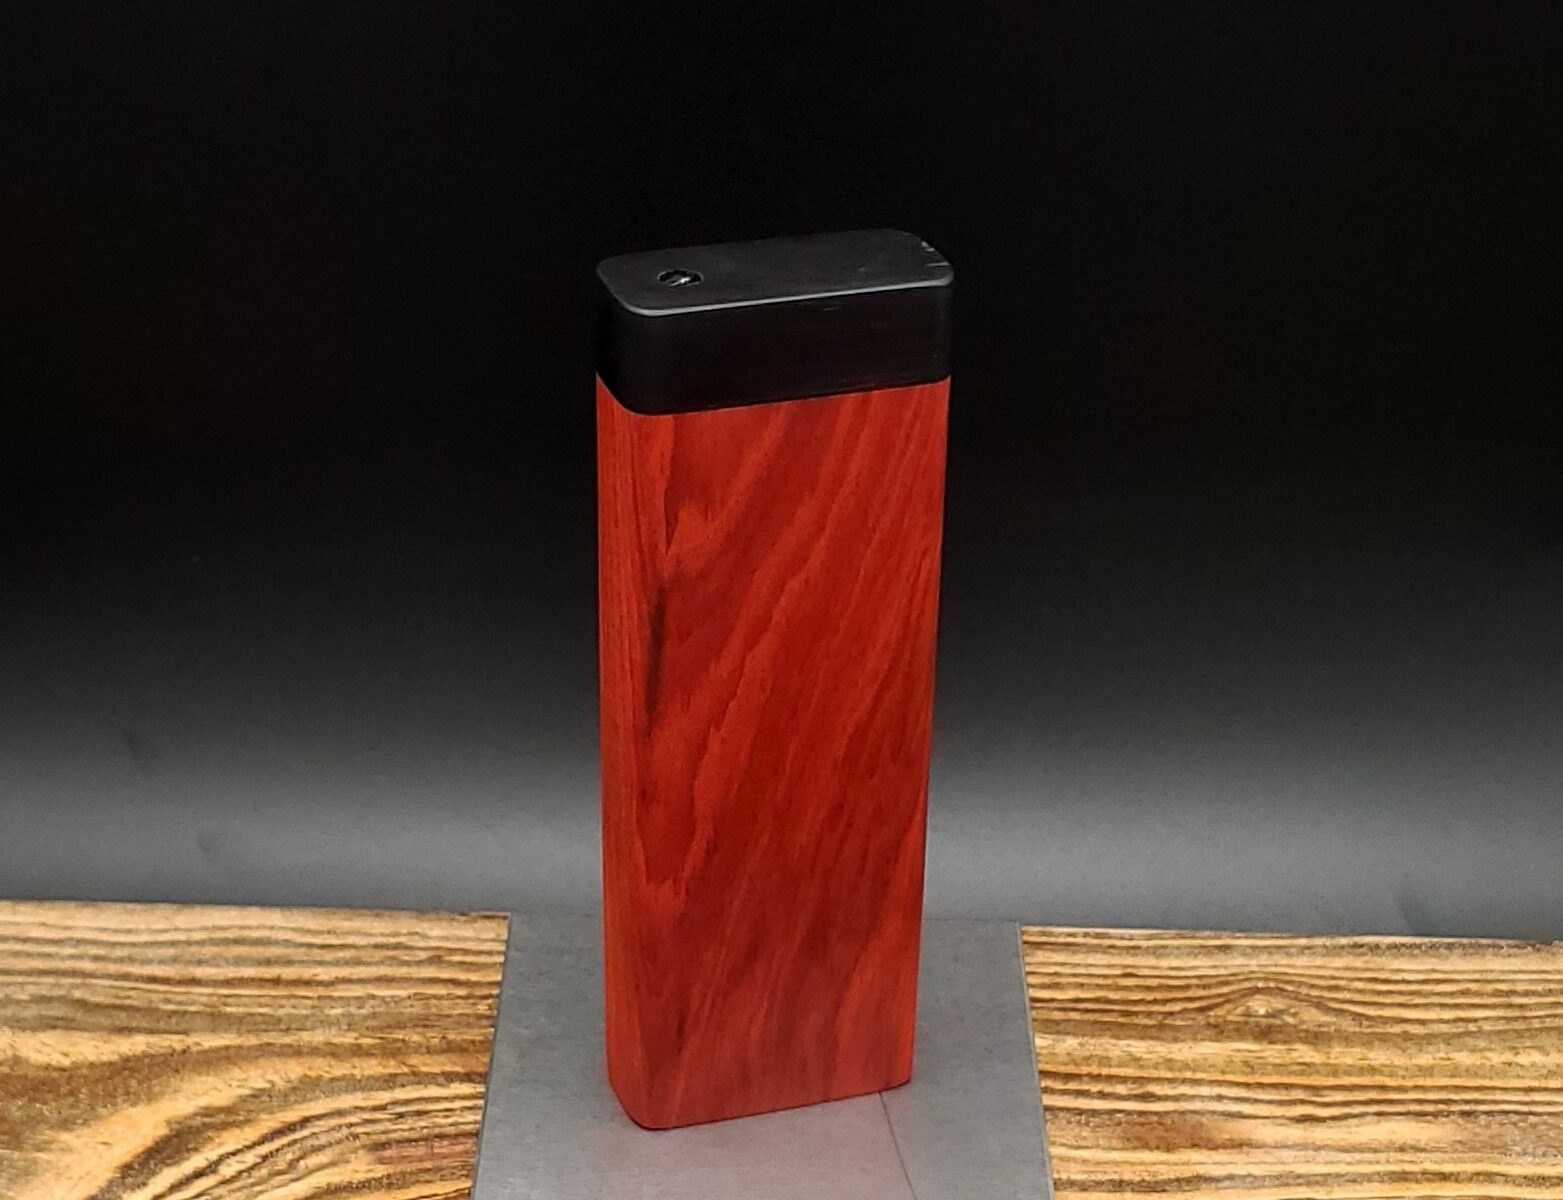 This image portrays Dynavap Quick Stash-Redheart/Ebony wood by Dovetail Woodwork.